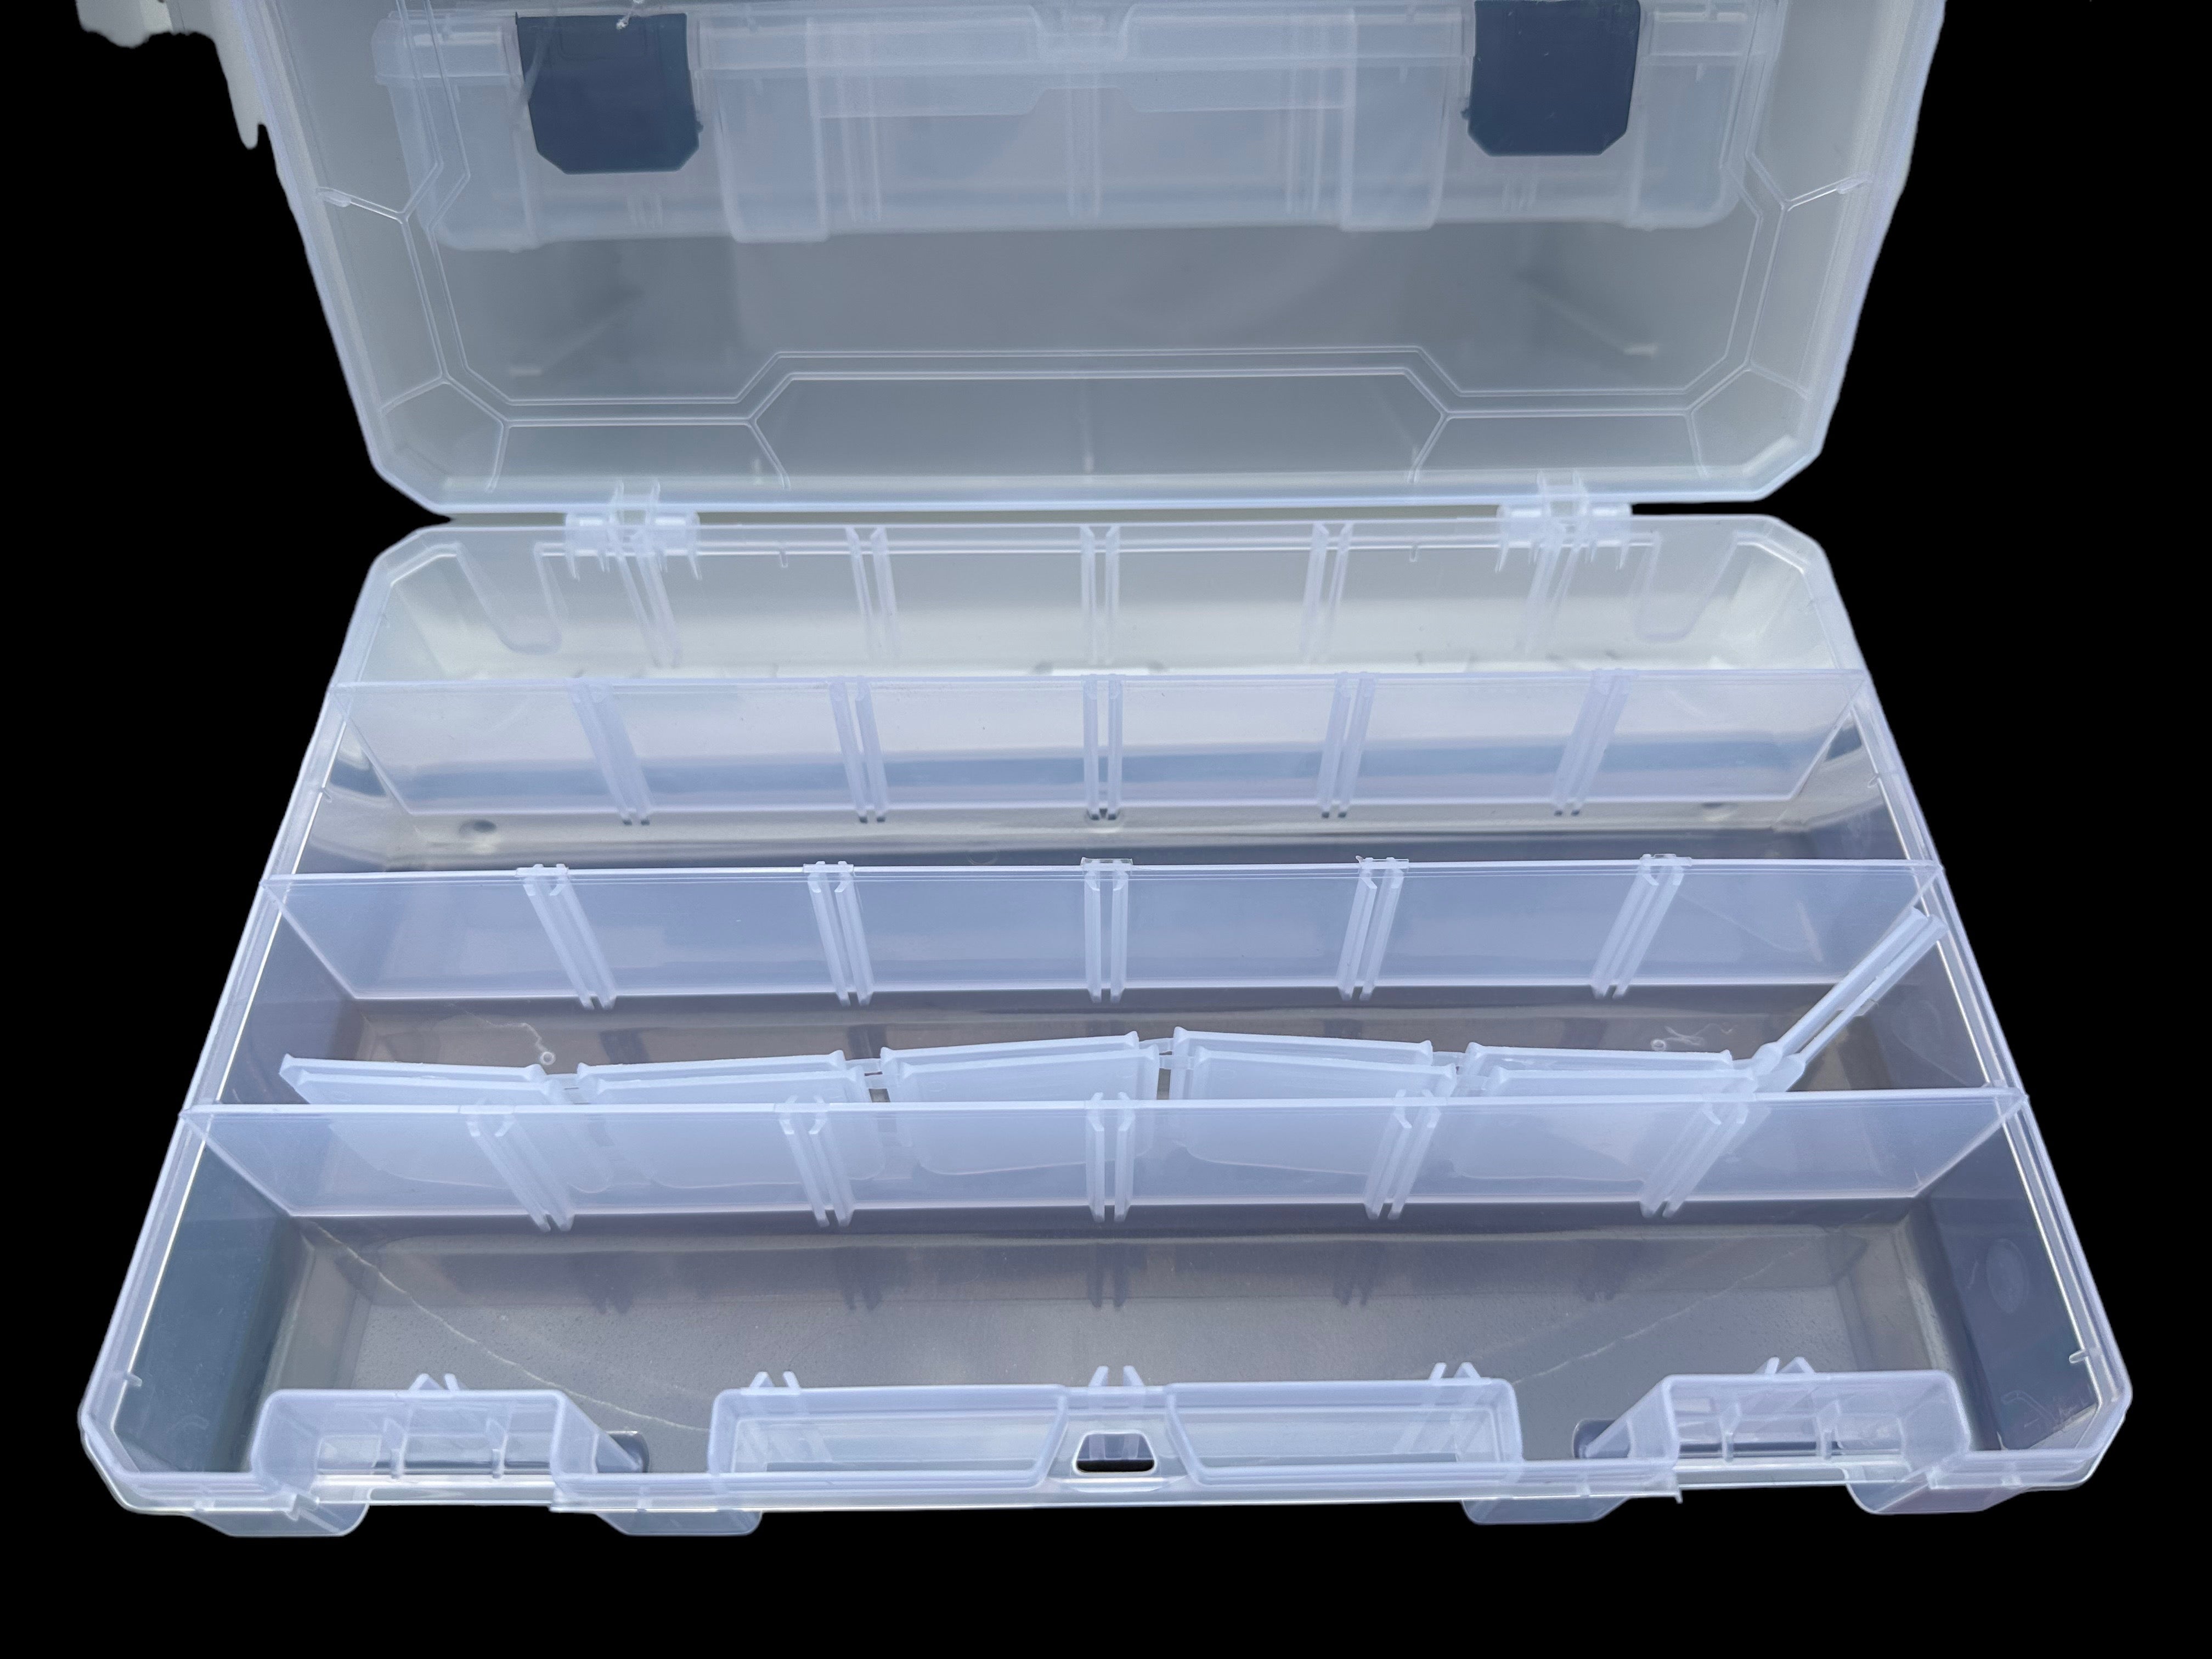 Tackle Box with Drawer and 3 Trays  Fishing tackle storage, Tackle box,  Fishing tackle box